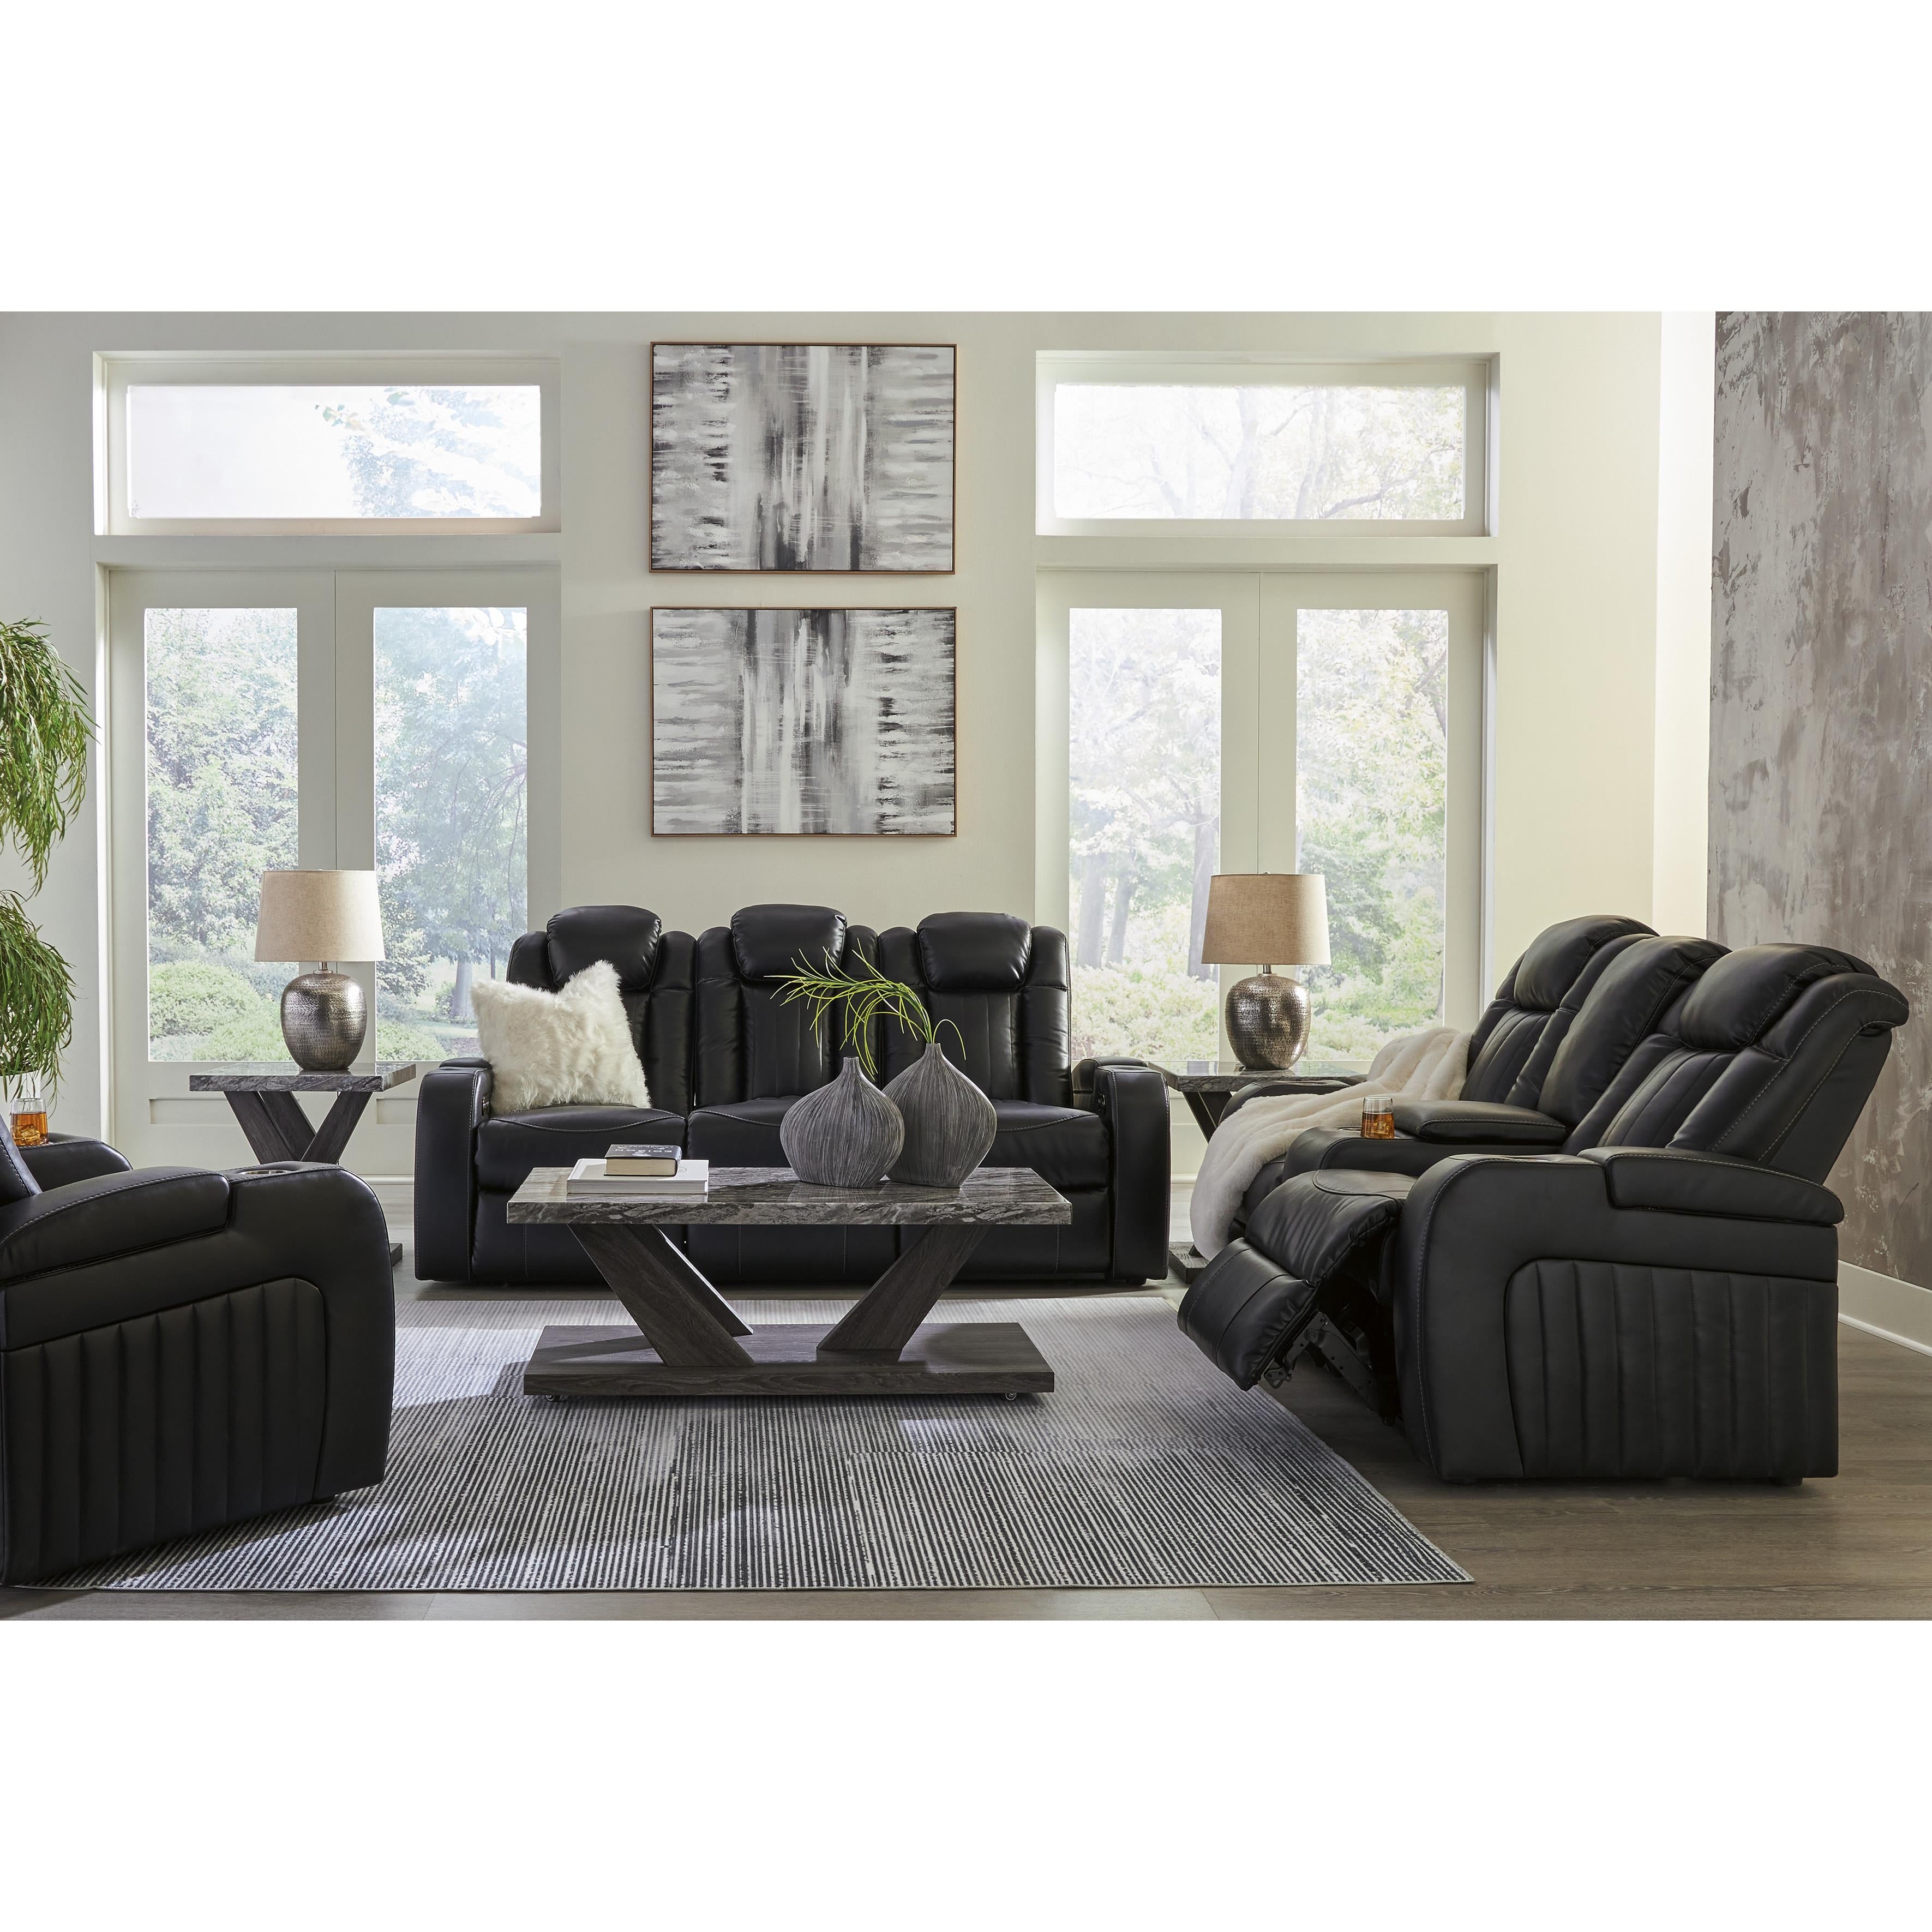 Signature Design by Ashley Caveman Den Power Reclining Leather Look Sofa 9070315 IMAGE 19